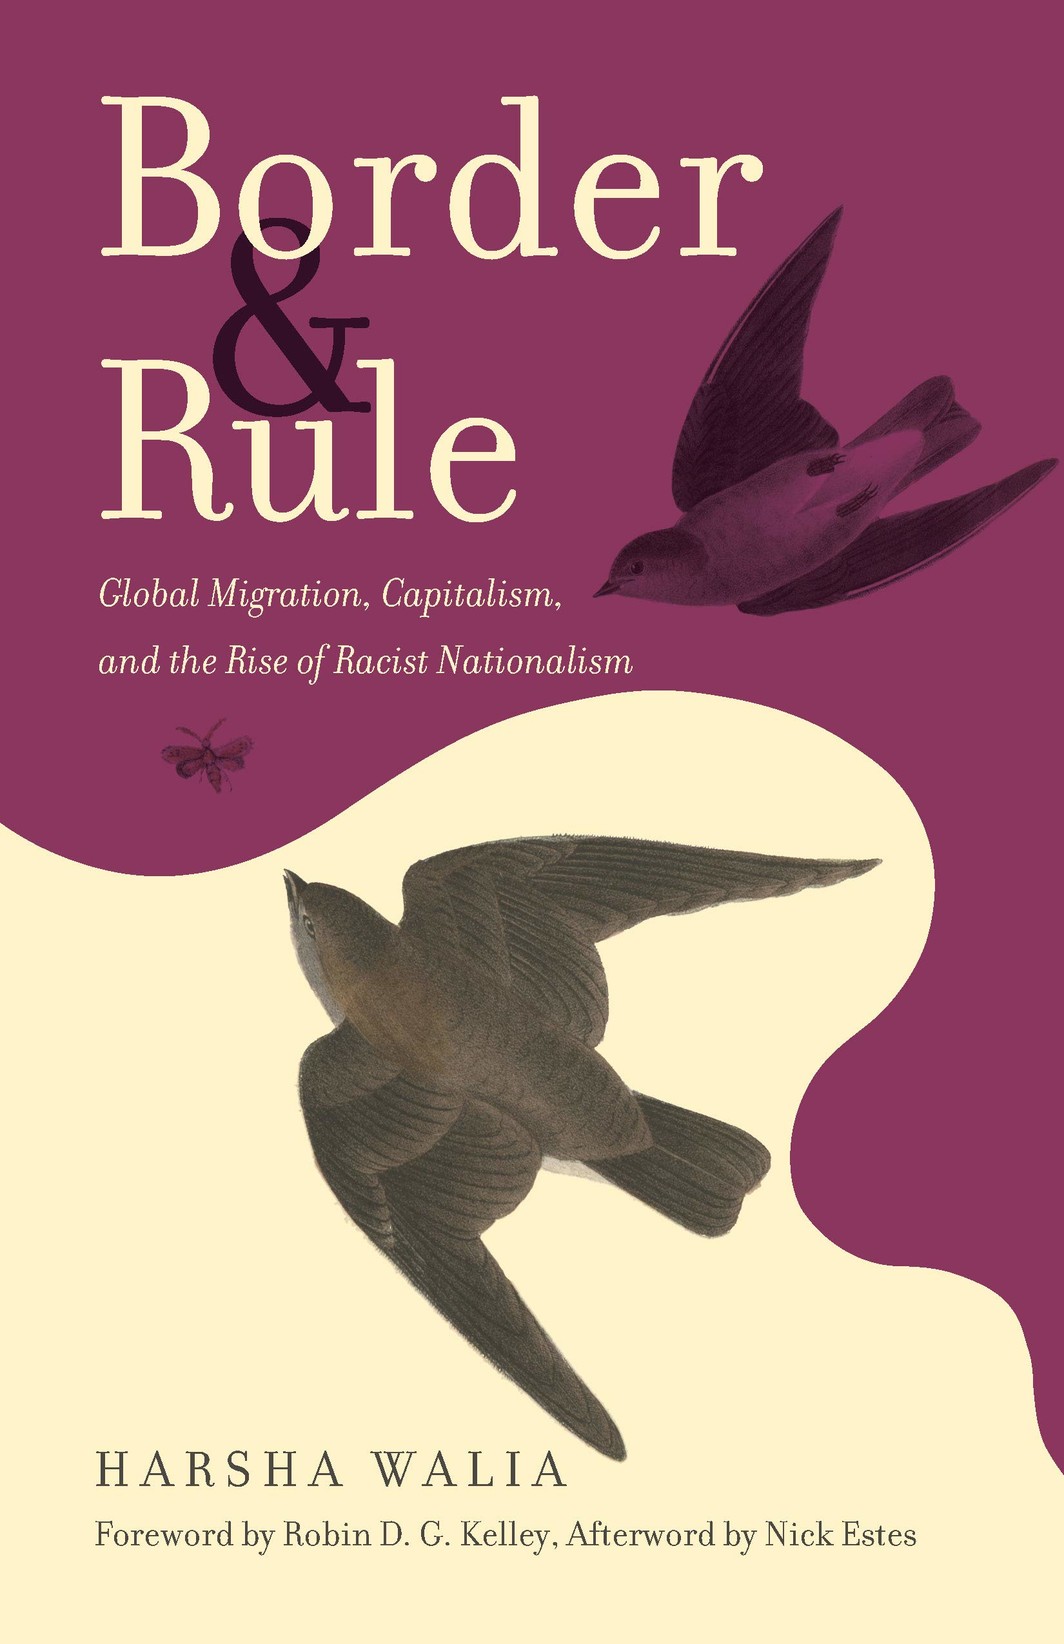 The cover of Border and Rule: Global Migration, Capitalism, and the Rise of Racist Nationalism